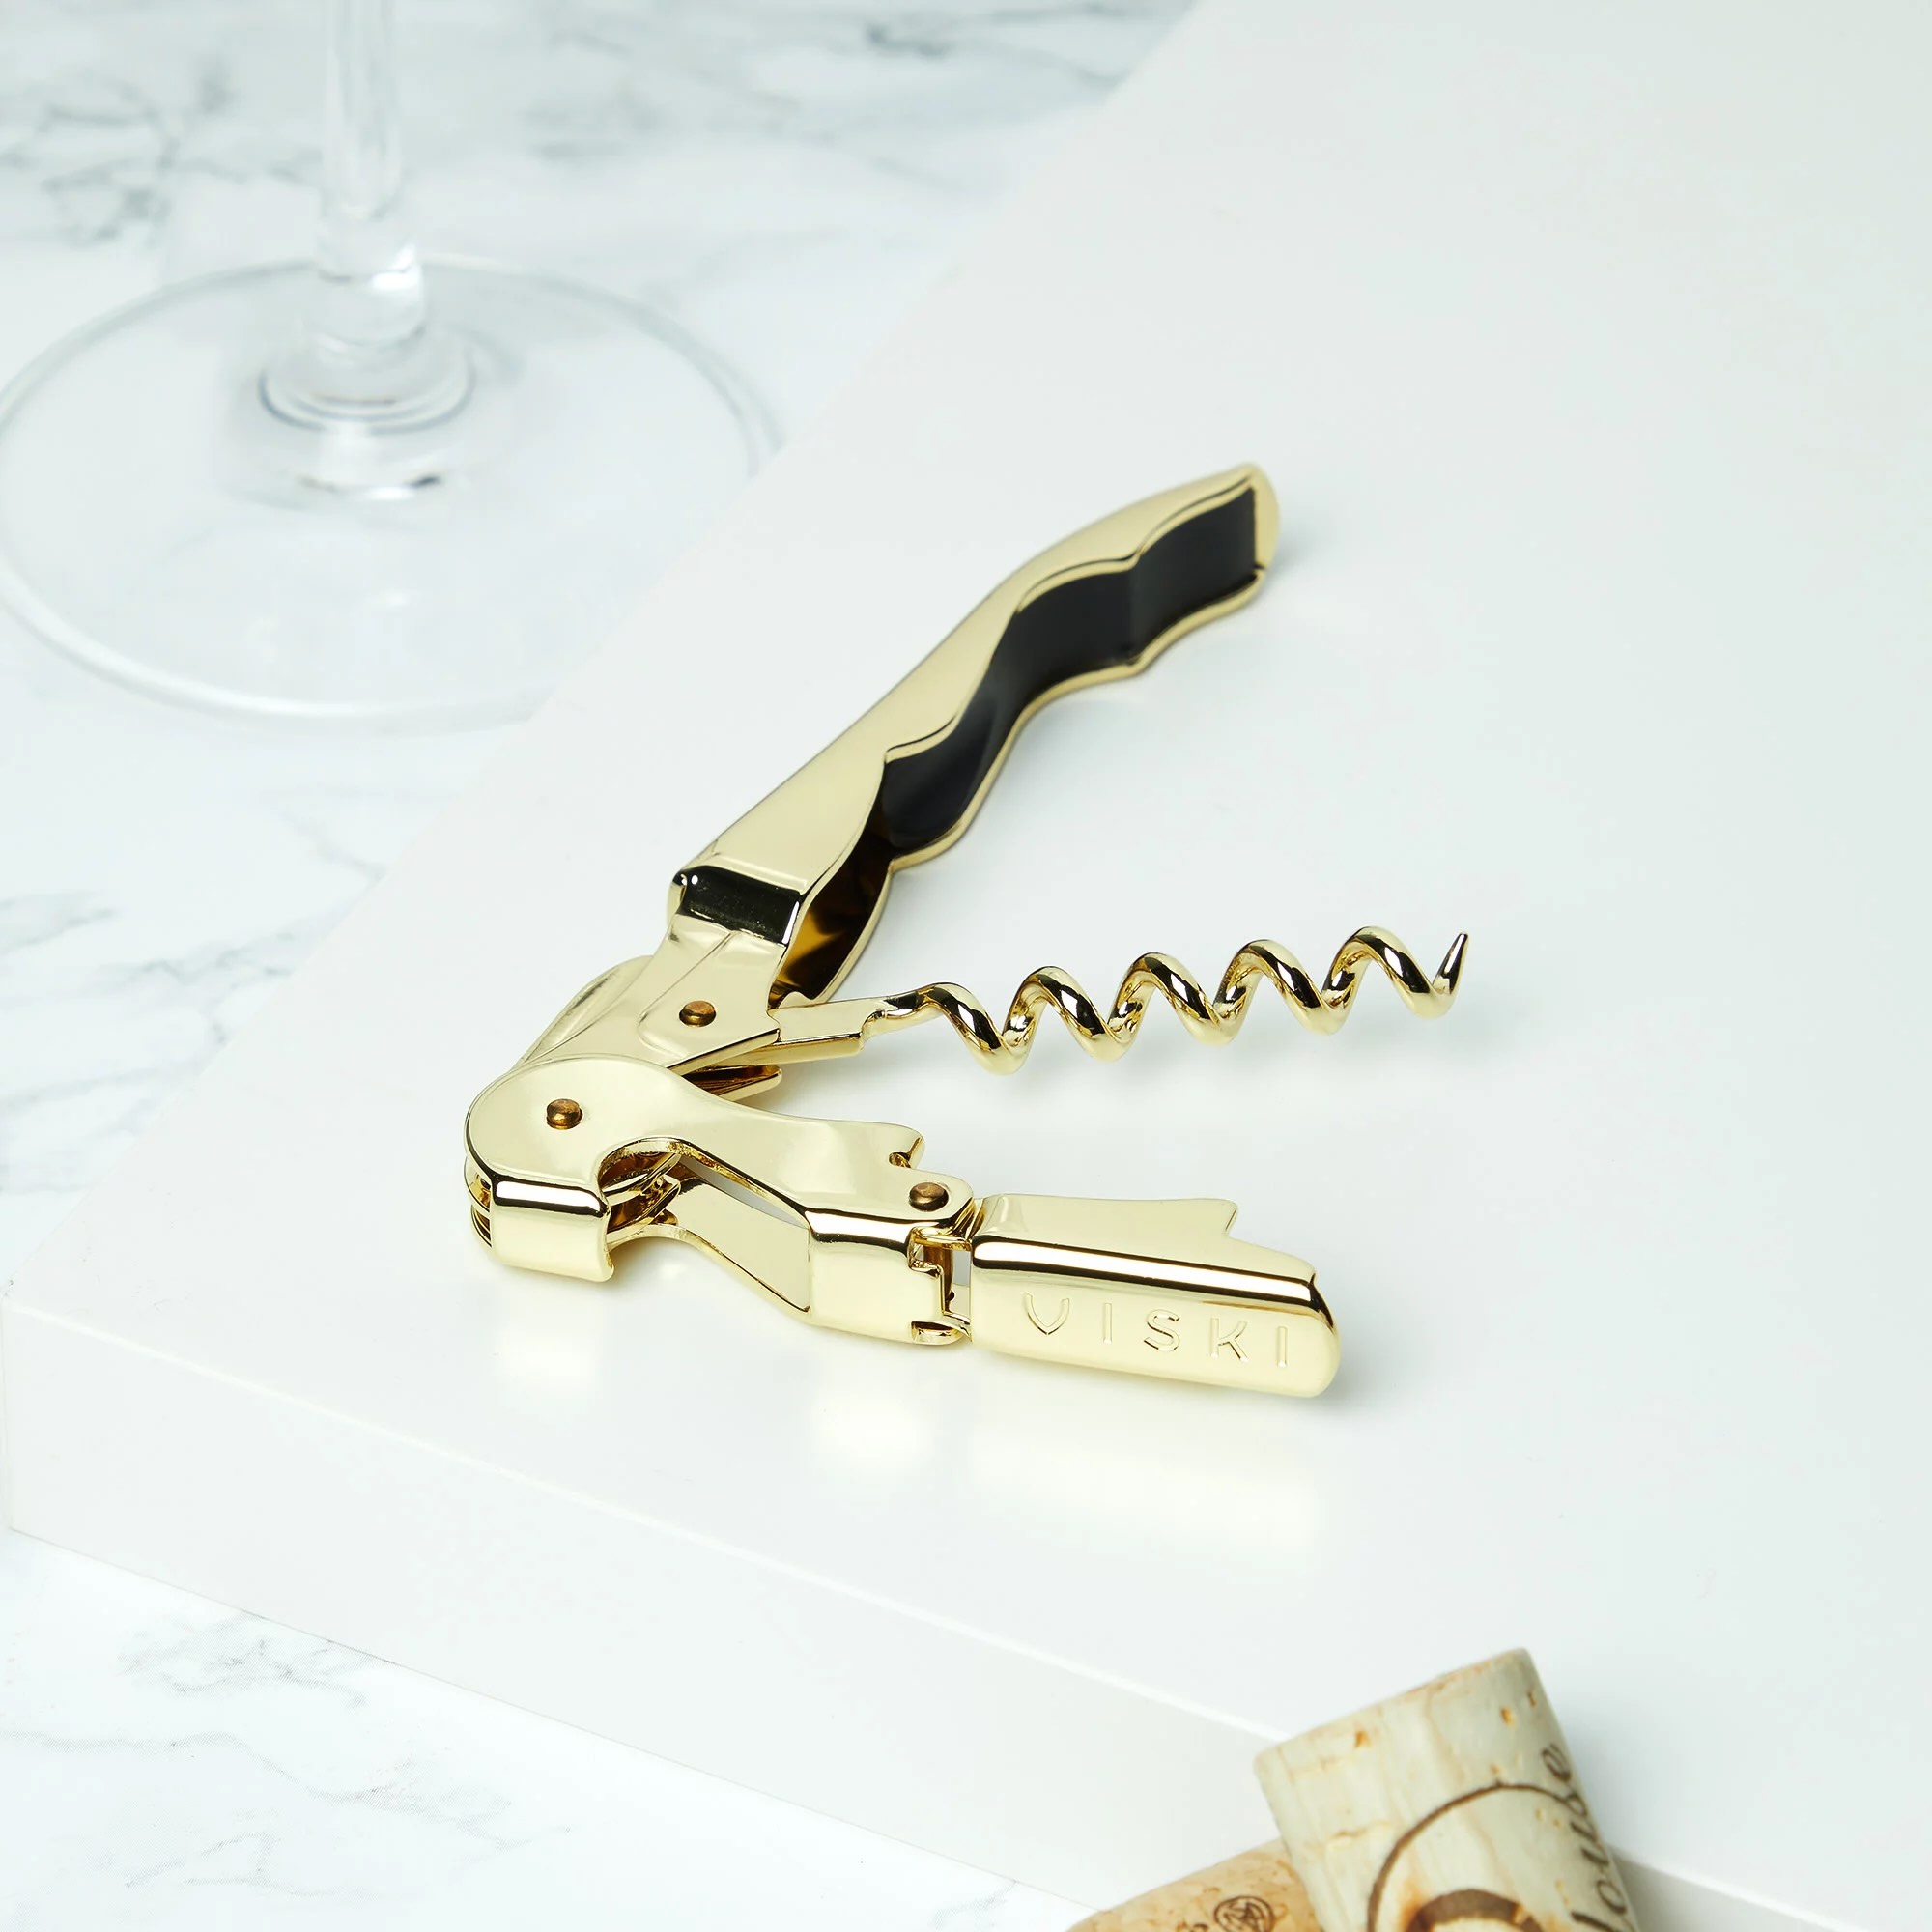 How To Use A Corkscrew Wine Opener